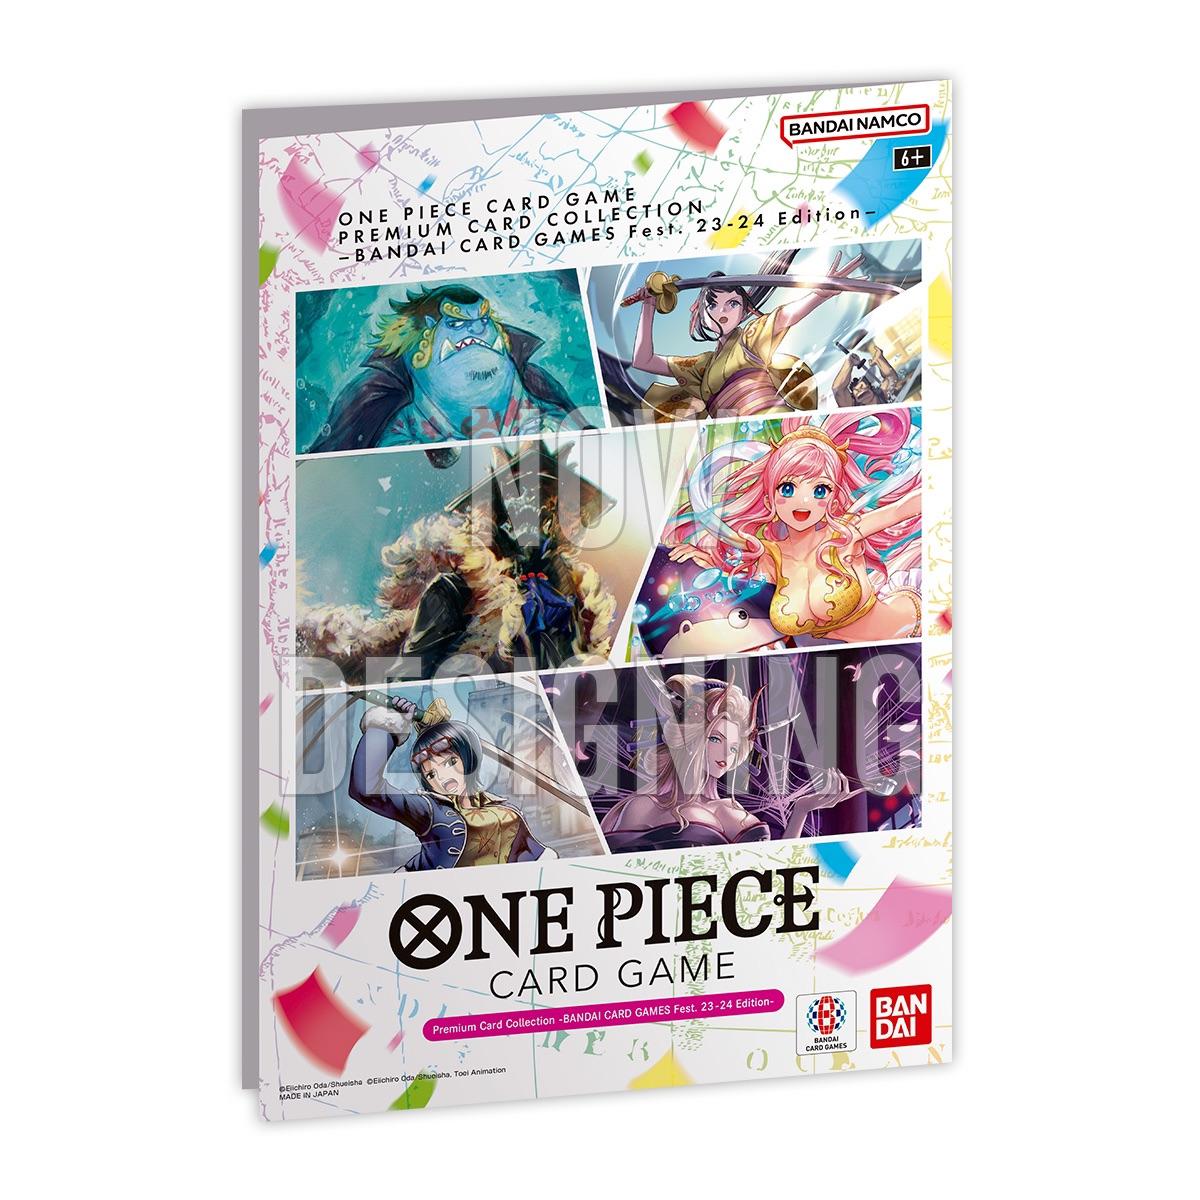 One Piece Card Game - Premium Card Collection - Cardfest (Pre-Order)